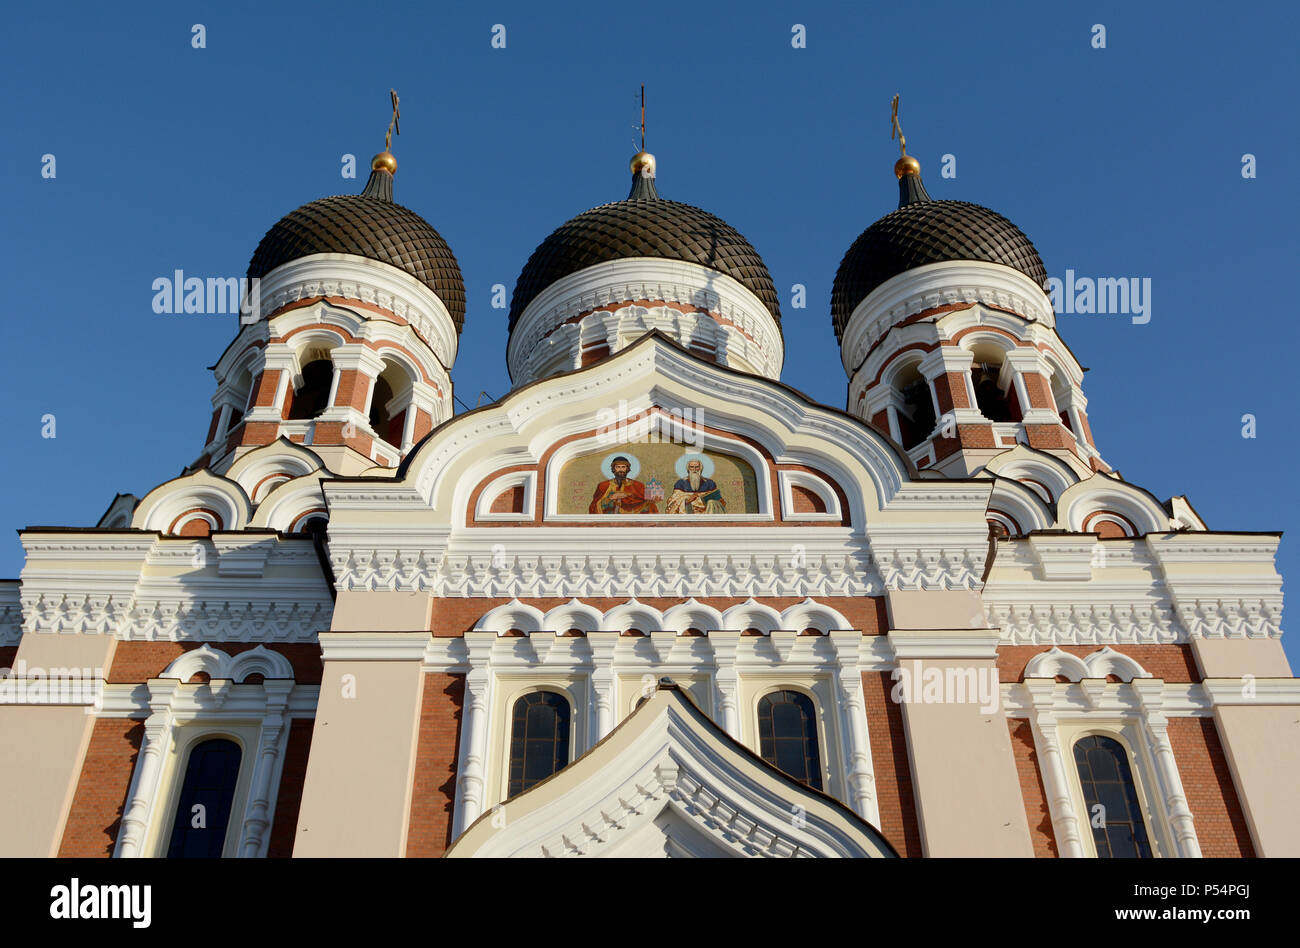 Exterior of Alexander Nevsky Cathedral in Tallinn, Estonia with ornate decoration and three of the building's five onion domes visible Stock Photo